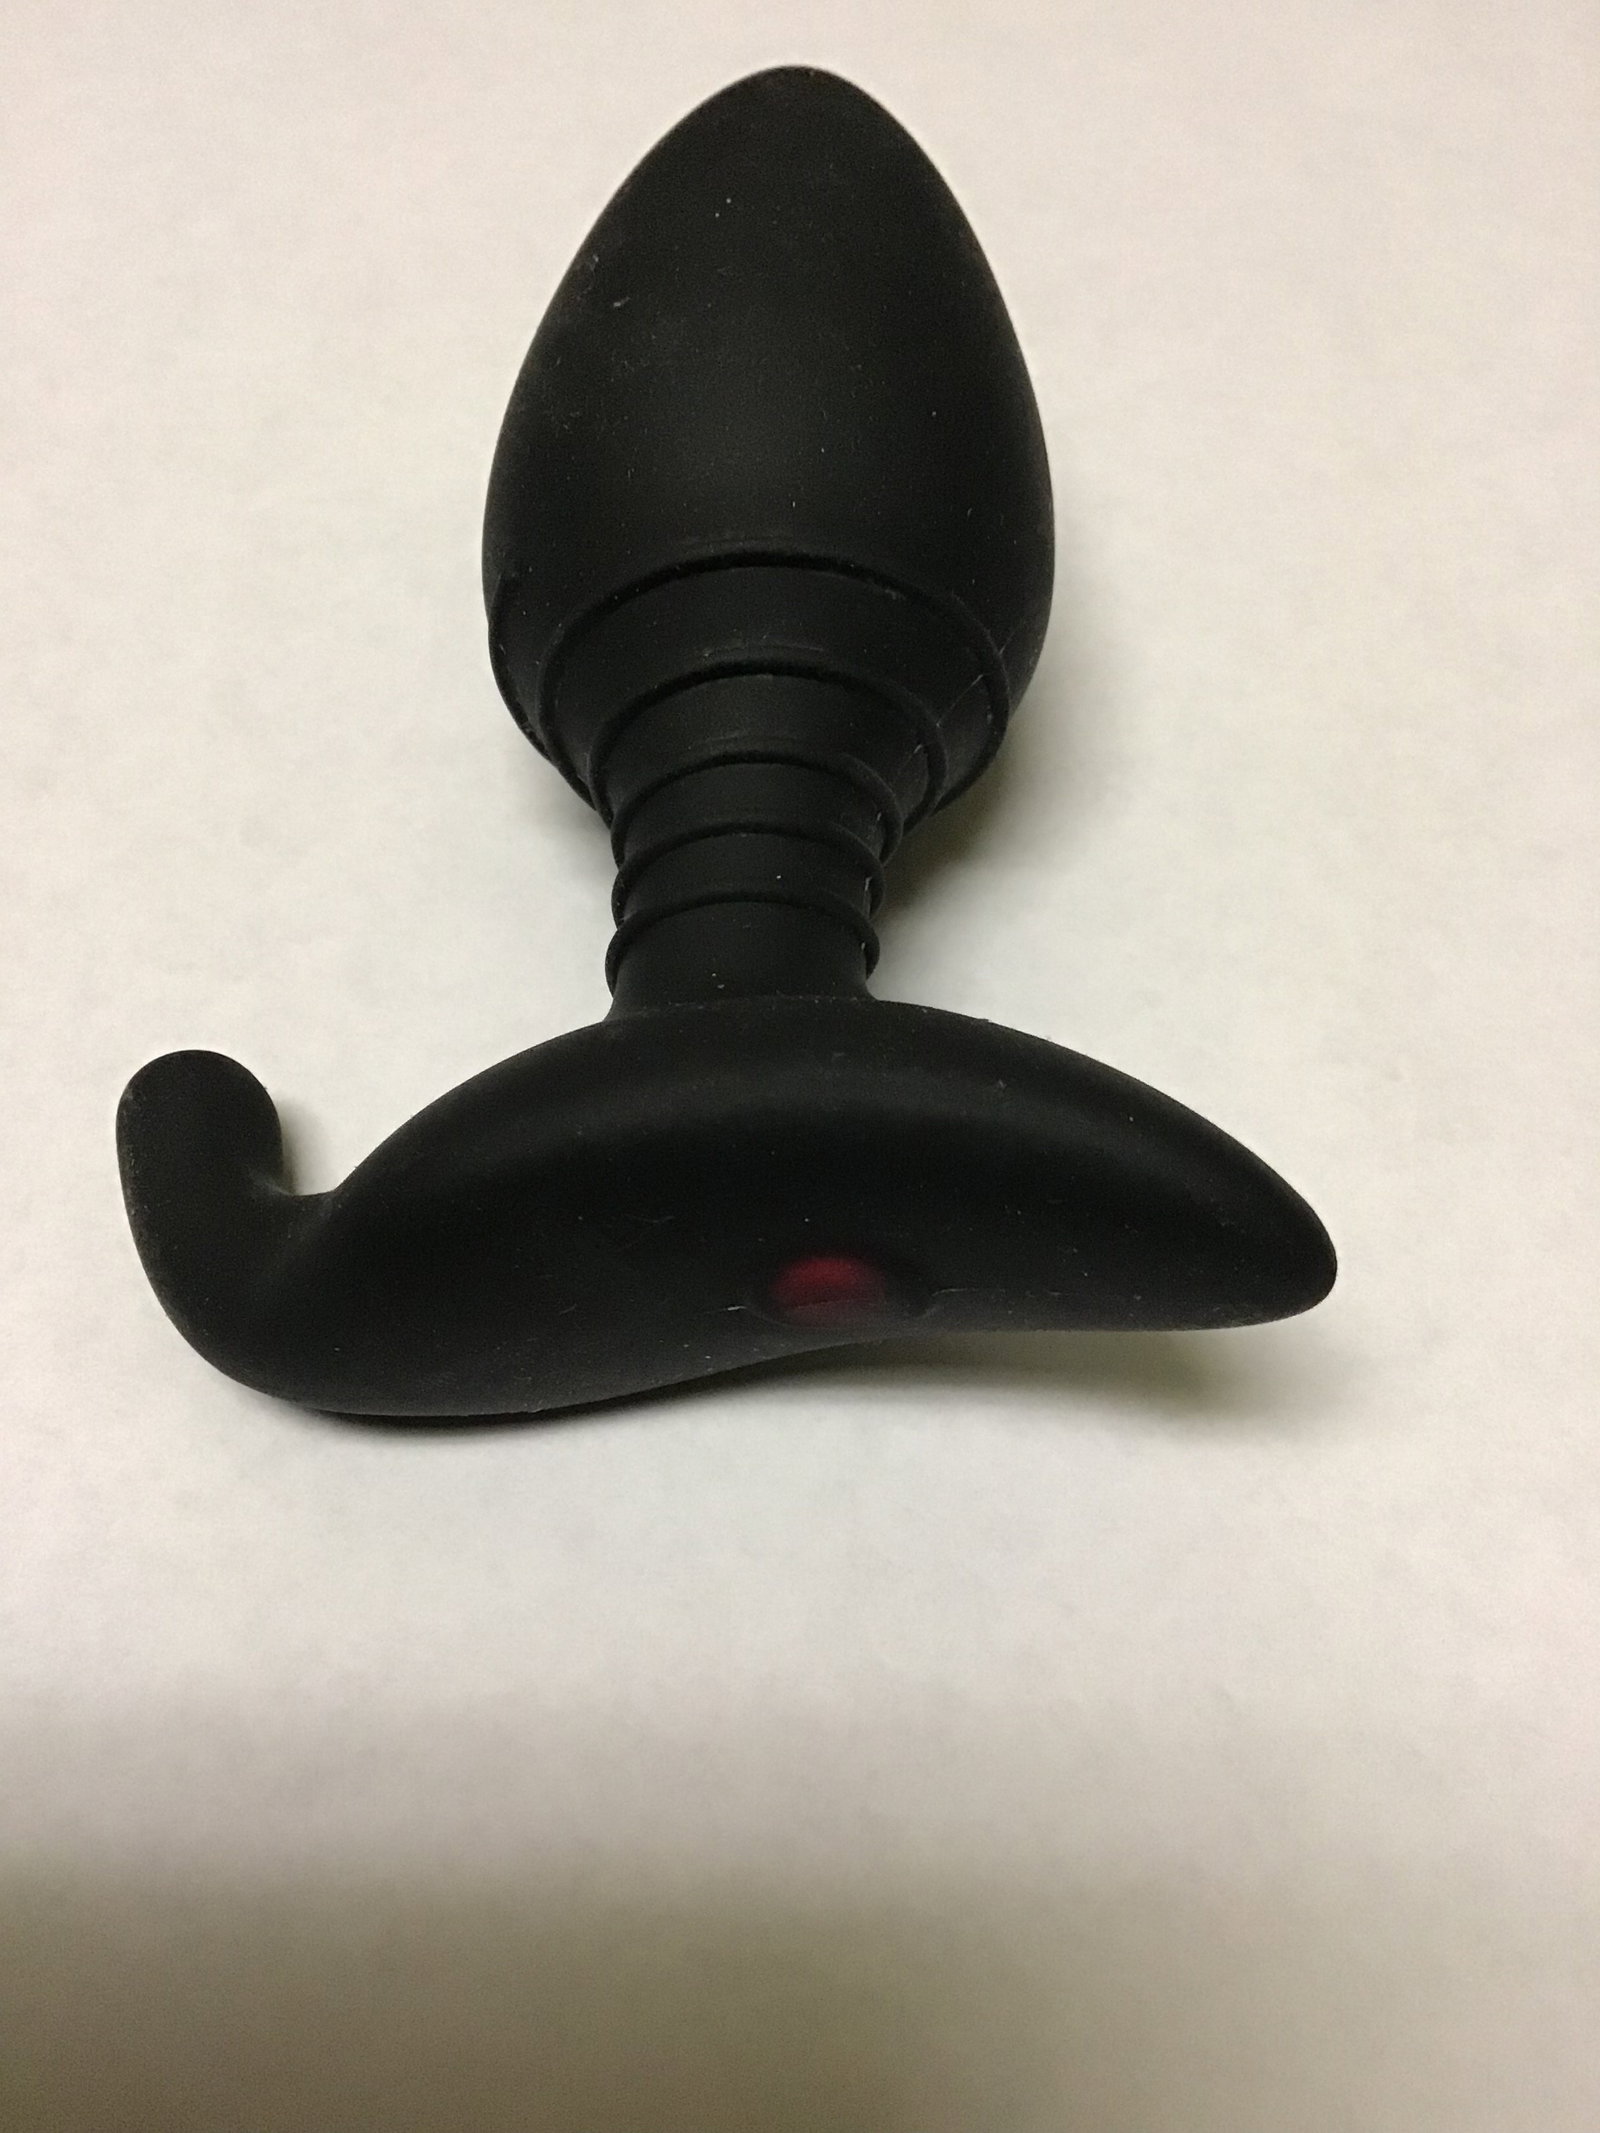 Photo by Blueeyejay with the username @Blueeyejay, who is a verified user,  December 15, 2018 at 8:21 PM. The post is about the topic Lovense and the text says 'Lovense Hush - Bluetooth Butt Plug 
Silicone, rechargeable, multi-level, preset vibration patterns, app control.  Gives a nice full feeling, good vibration transmission, easy removal when plenty of lube used. YMMV'